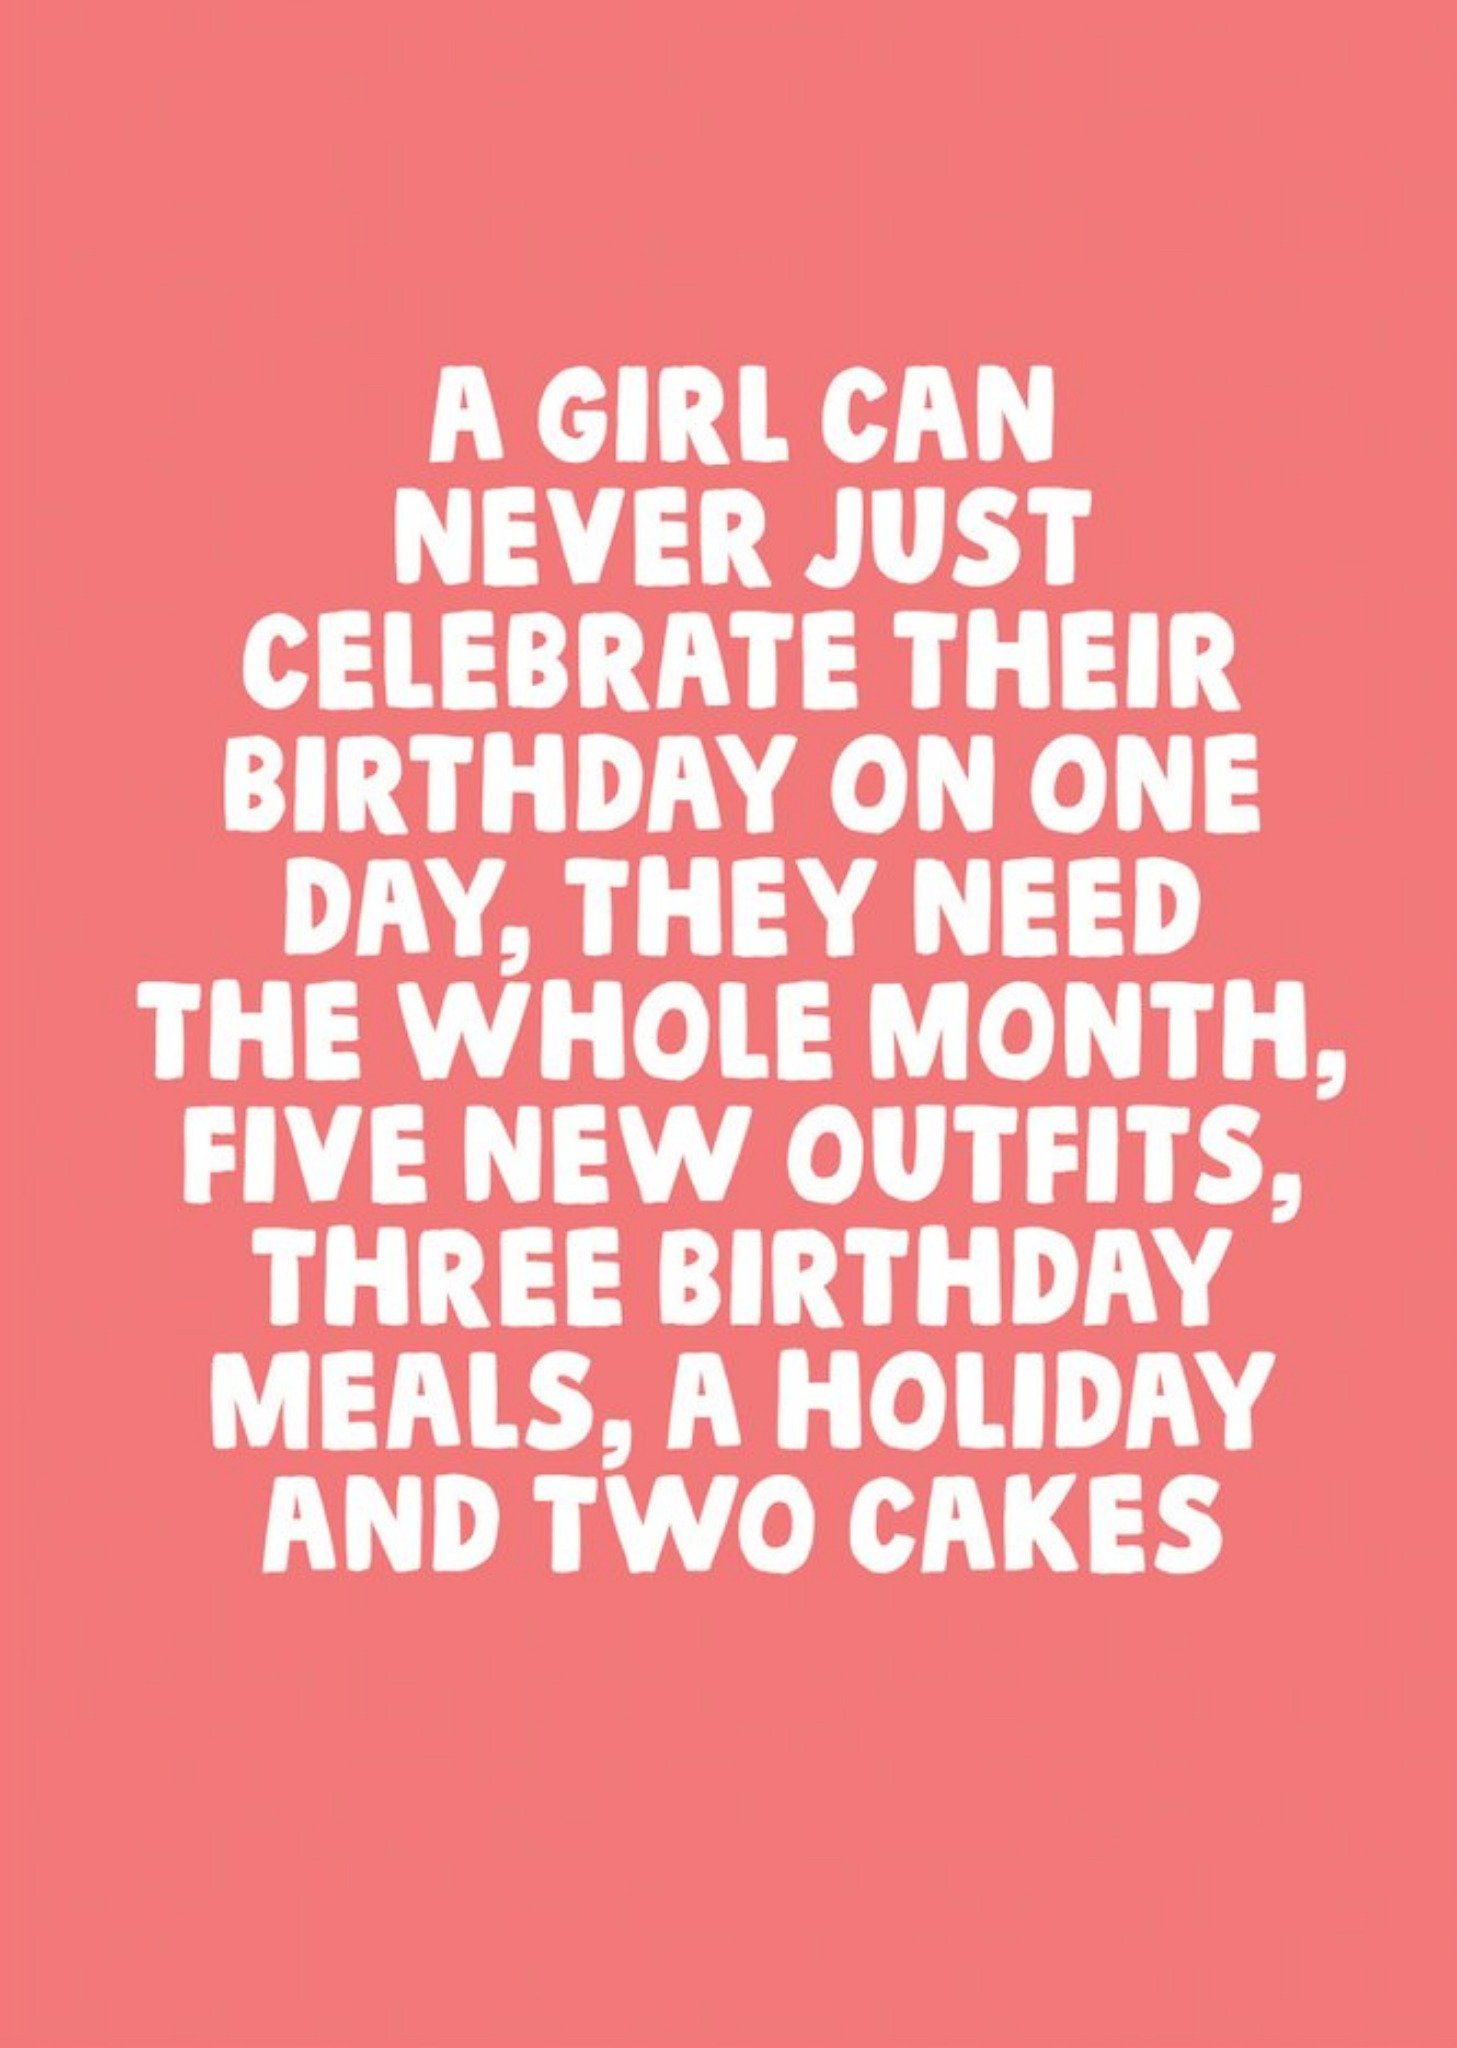 Moonpig Funny A Girl Can Never Just Celebrate Their Birthday On One Day Card Ecard